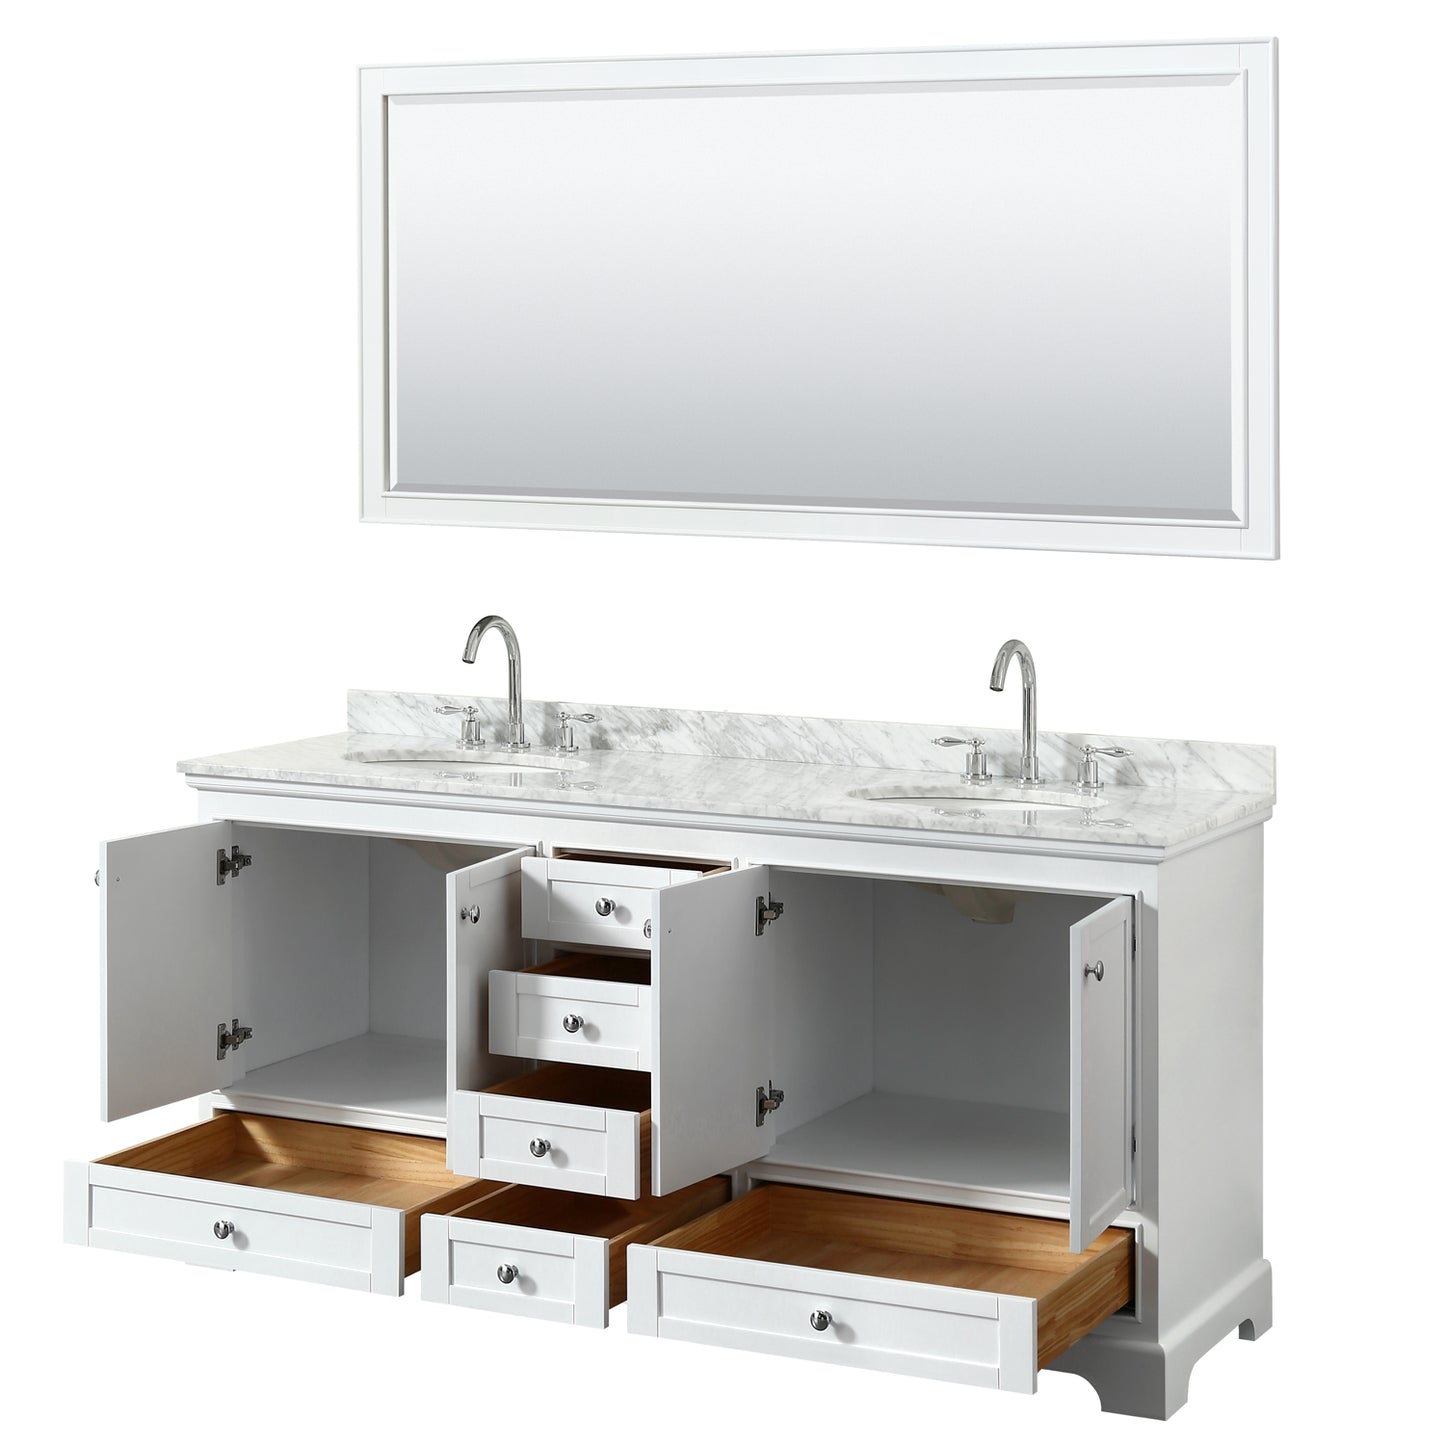 72 Inch Double Bathroom Vanity, White Carrara Marble Countertop, Undermount Oval Sinks, and 70 Inch Mirror - Luxe Bathroom Vanities Luxury Bathroom Fixtures Bathroom Furniture